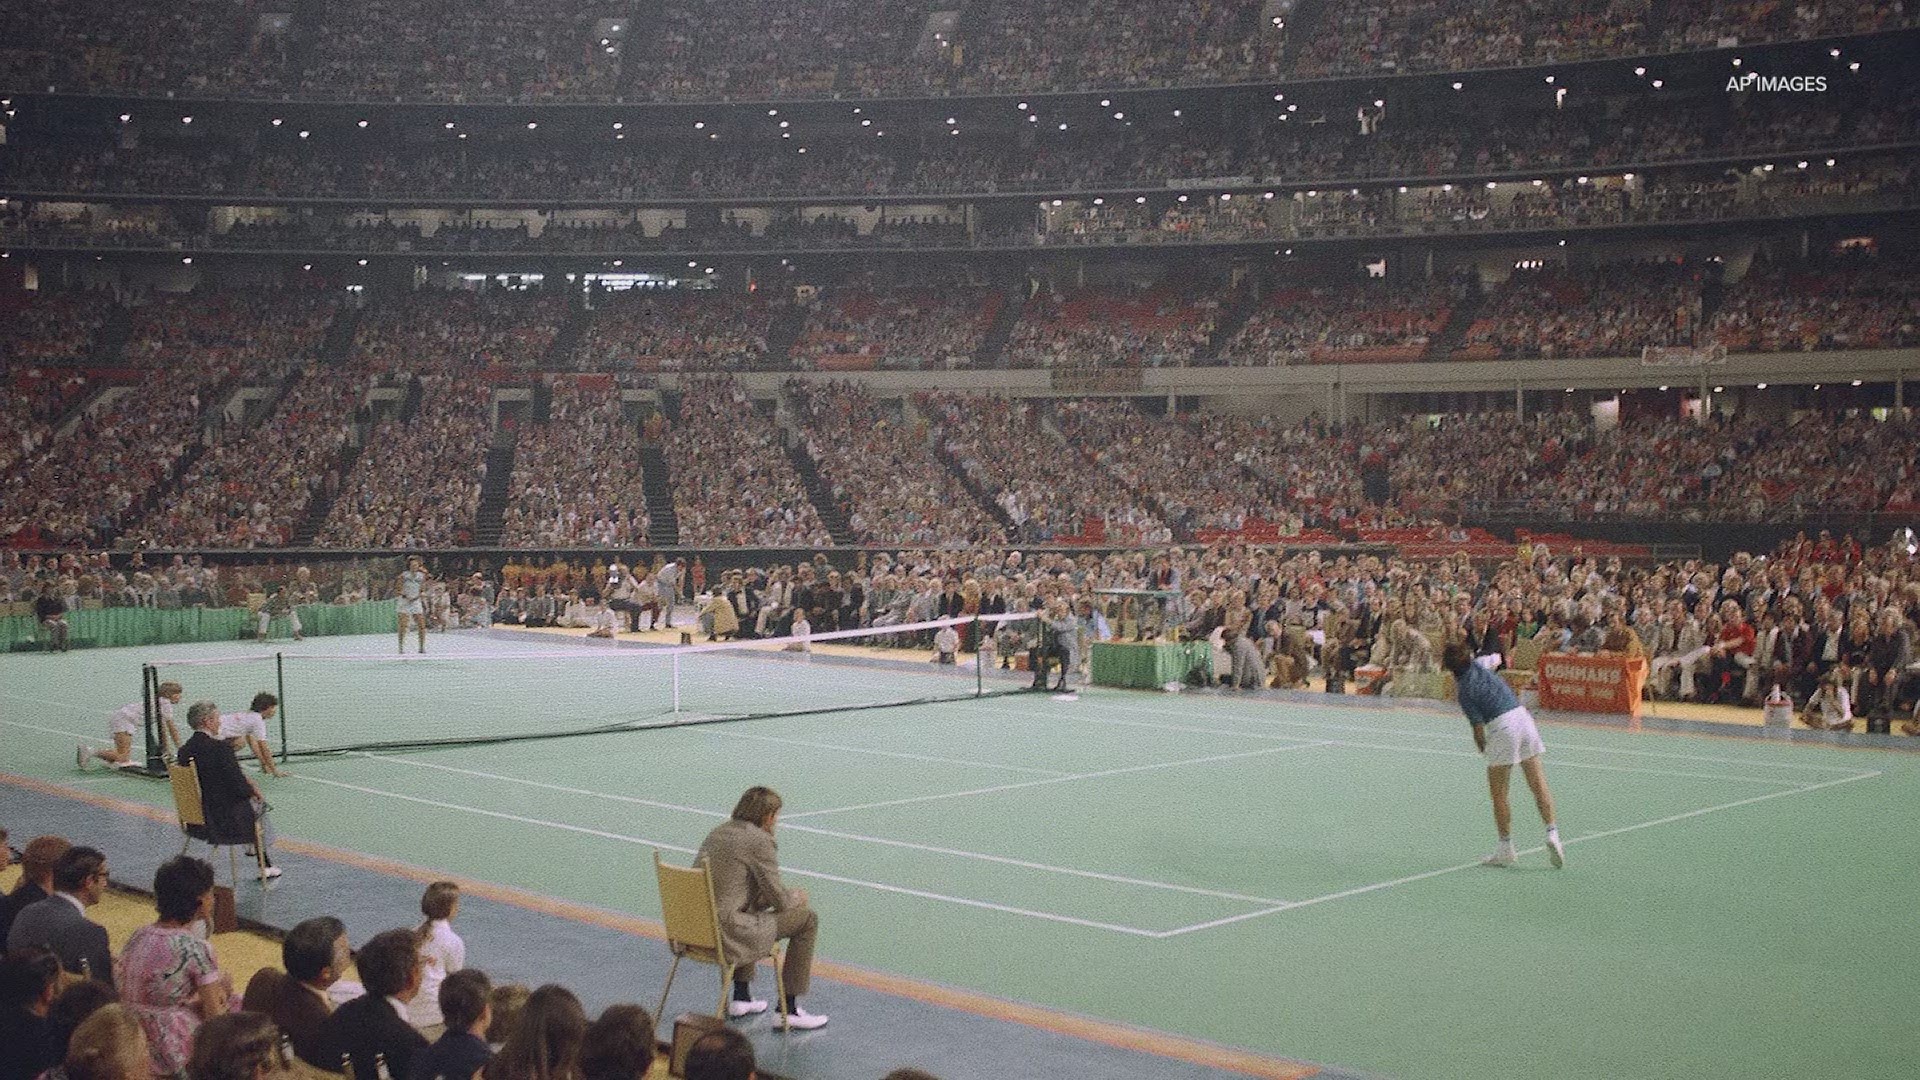 First-hand accounts from one of the biggest sporting events in the history of the Astrodome.